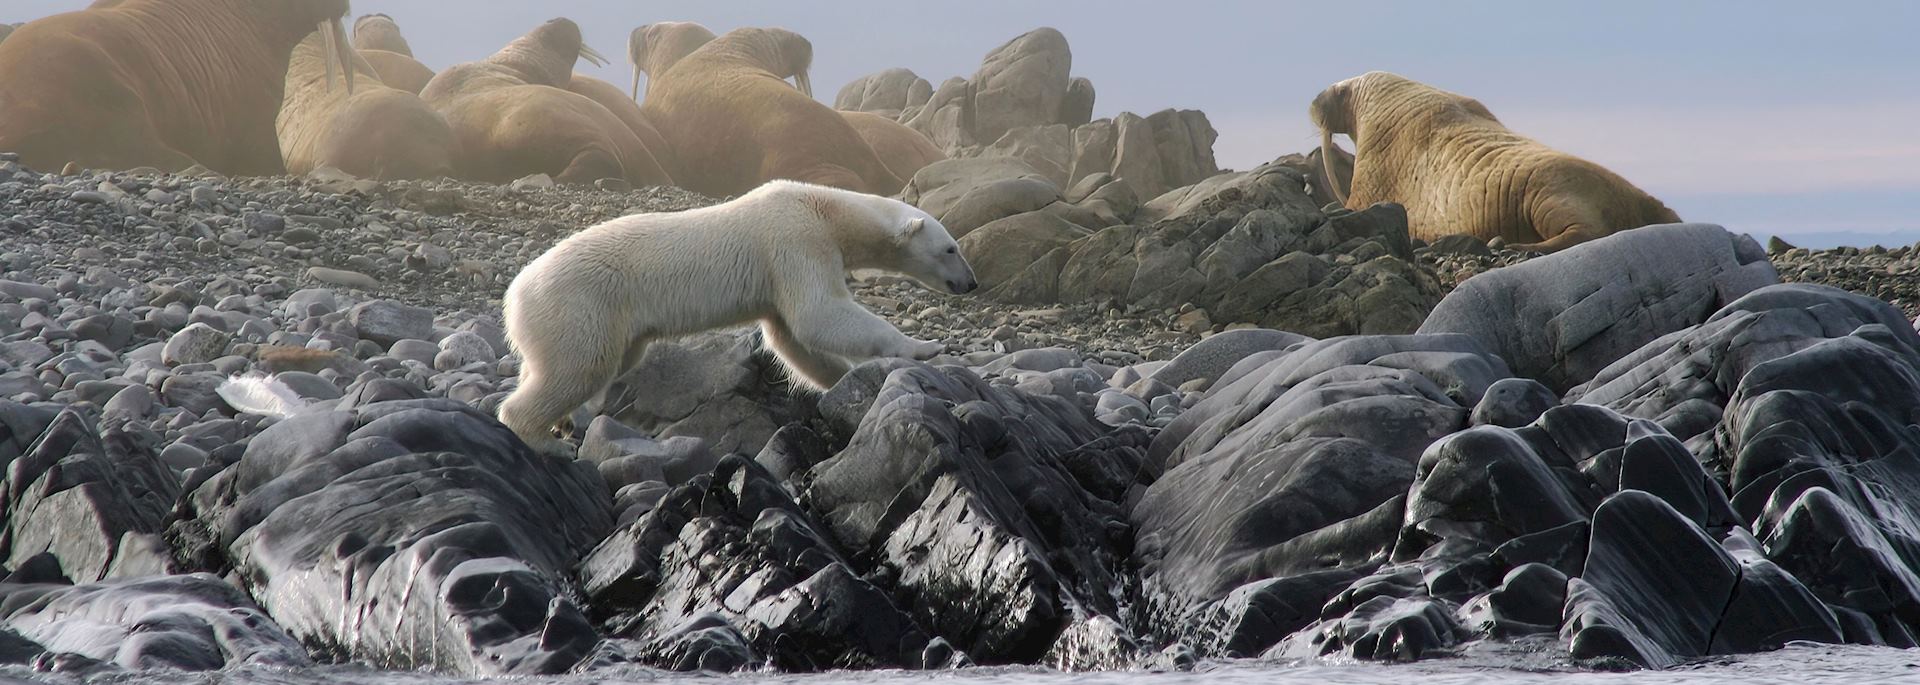 Polar bear and walrus colony spotted on a North Spitsbergen cruise